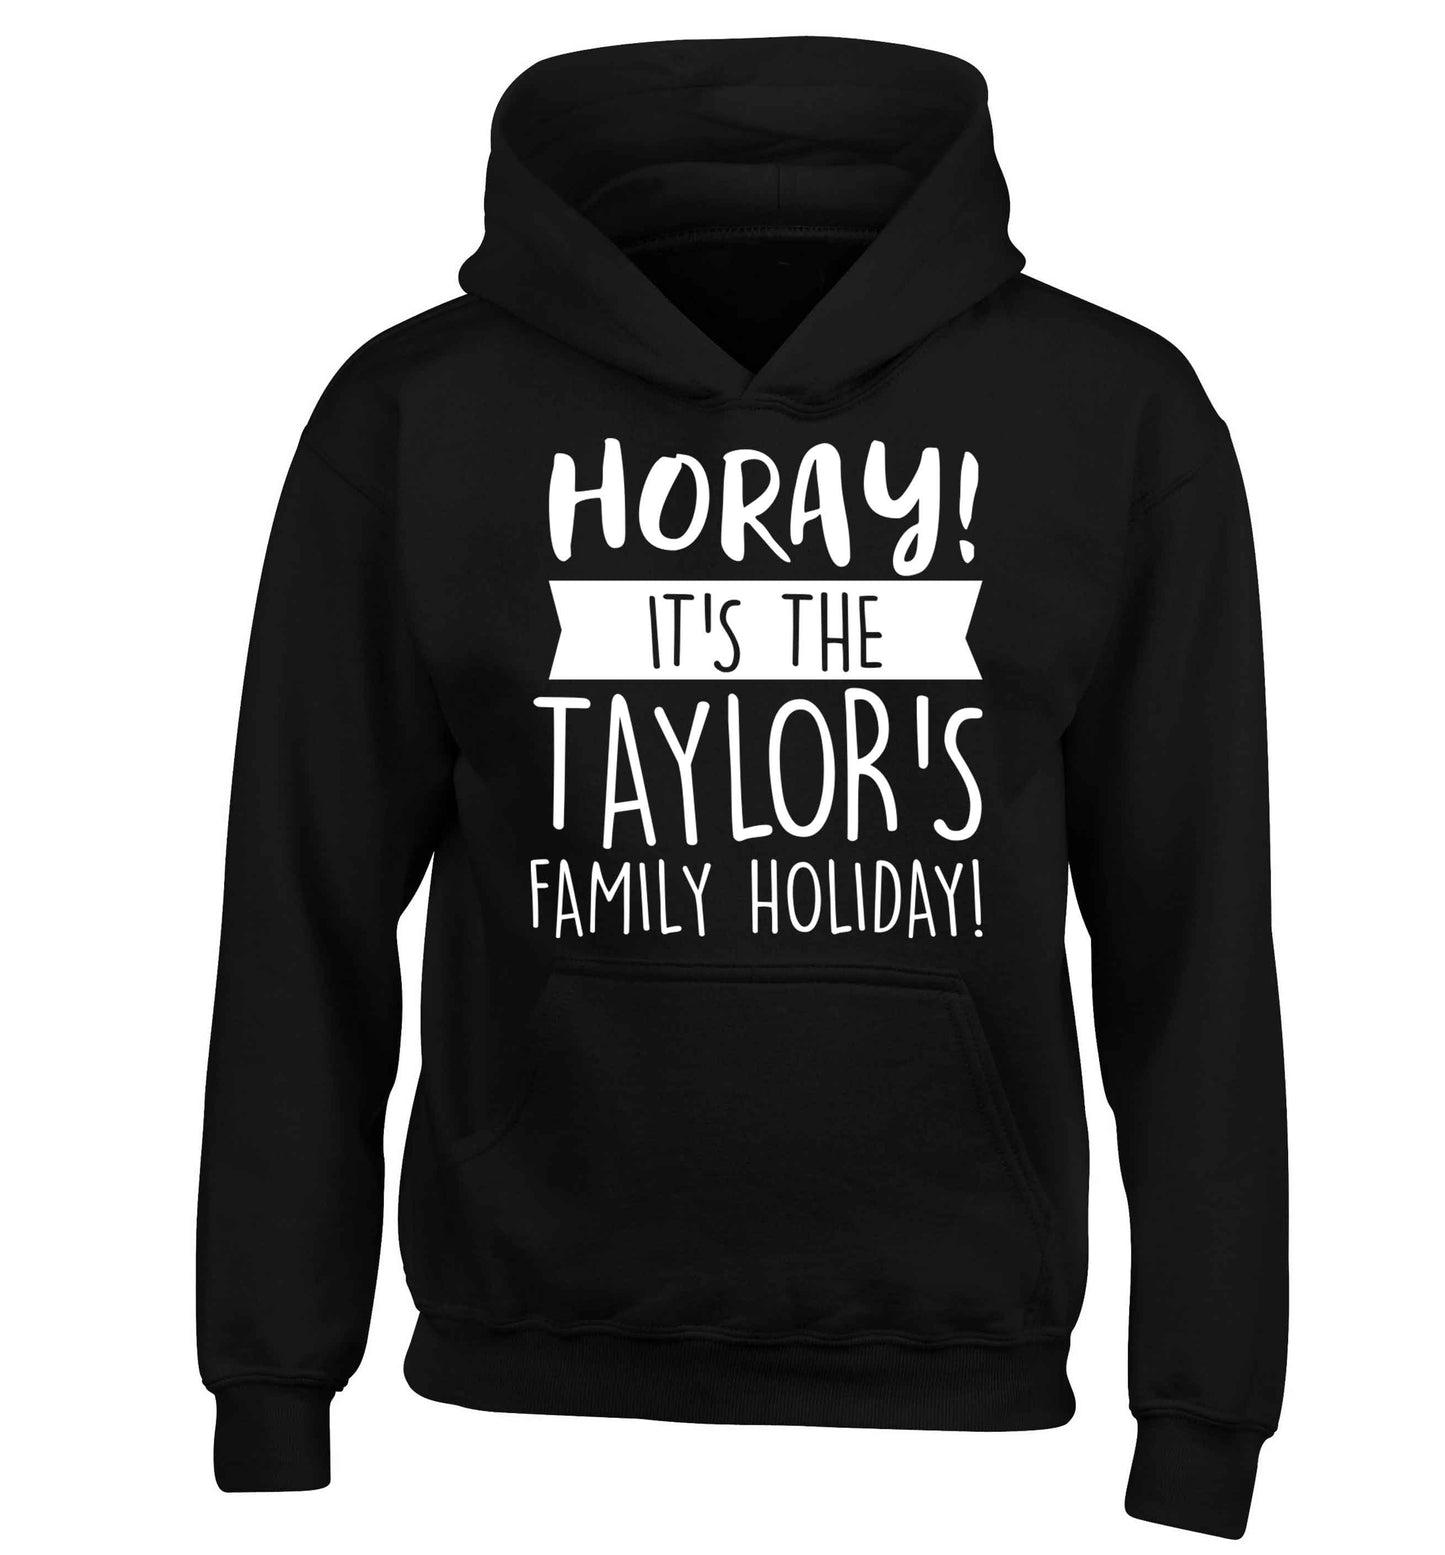 Horay it's the Taylor's family holiday! personalised item children's black hoodie 12-13 Years